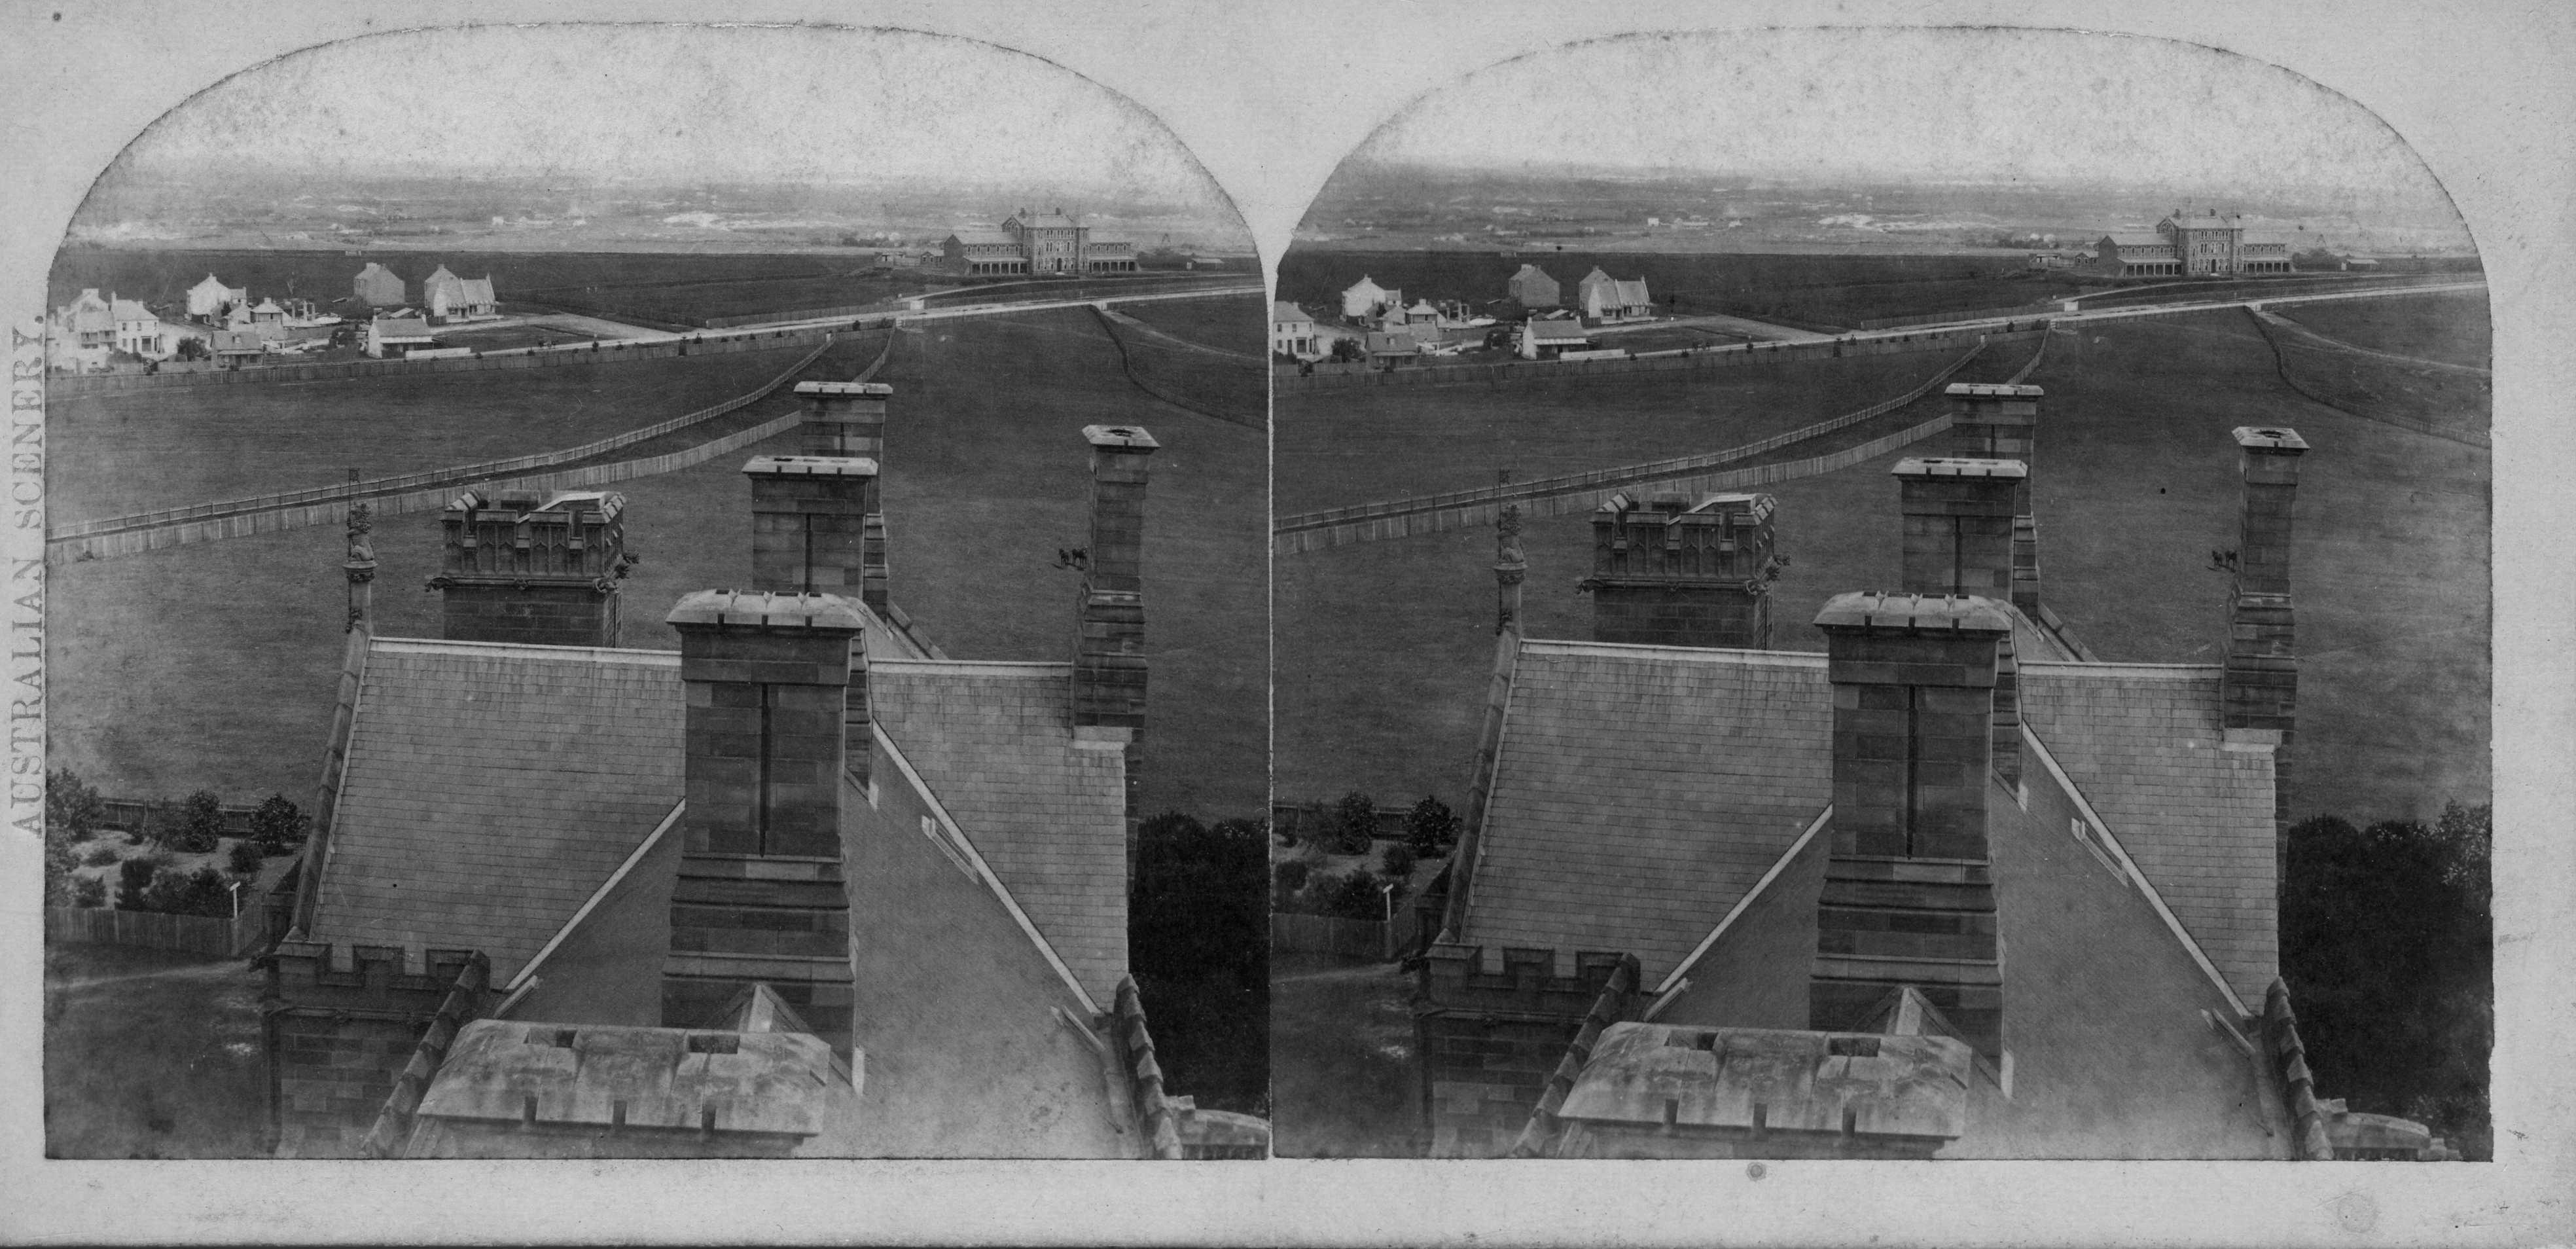 STEREO VIEW FROM CLOCK TOWER SHOWING ROOF OF MAIN BUILDING AND GROUNDS